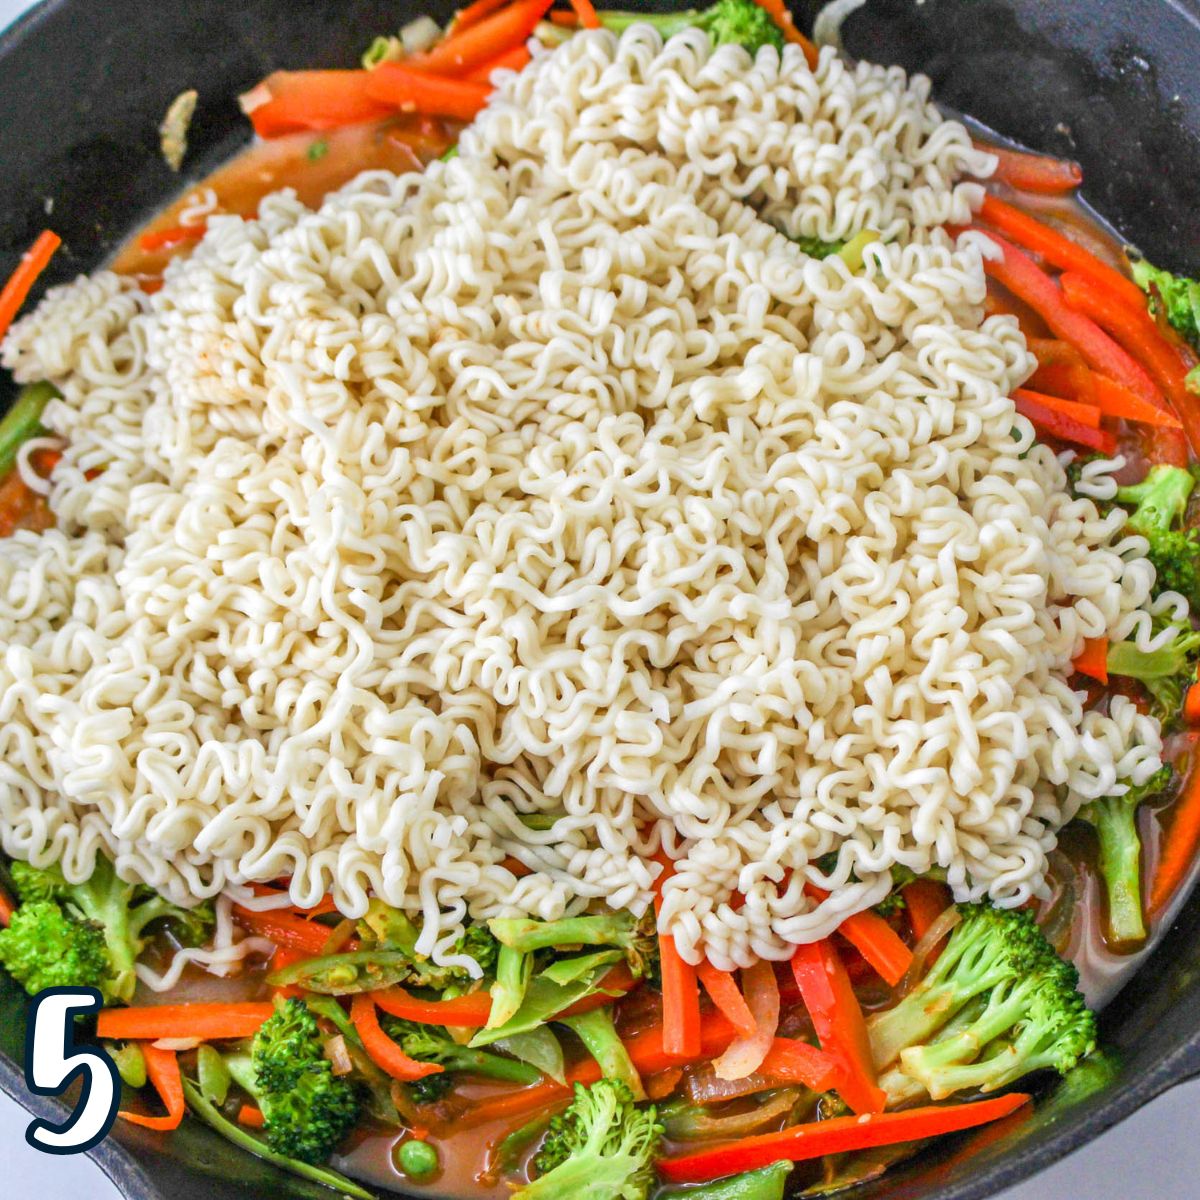 A pan with ramen noodles and vegetables in it.